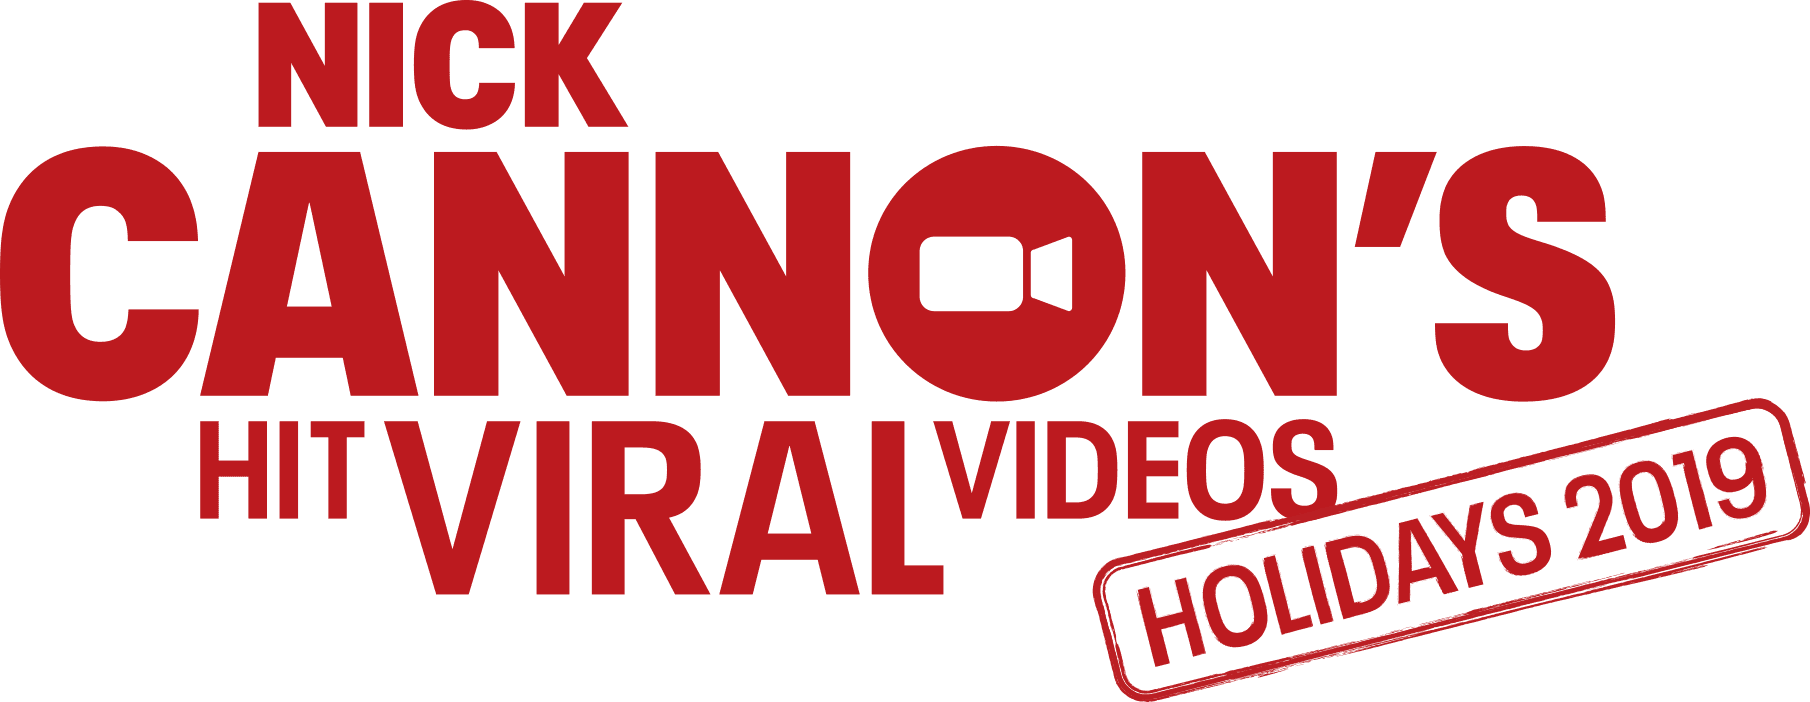 Nick Cannon's Hit Viral Videos: Holiday 2019 logo